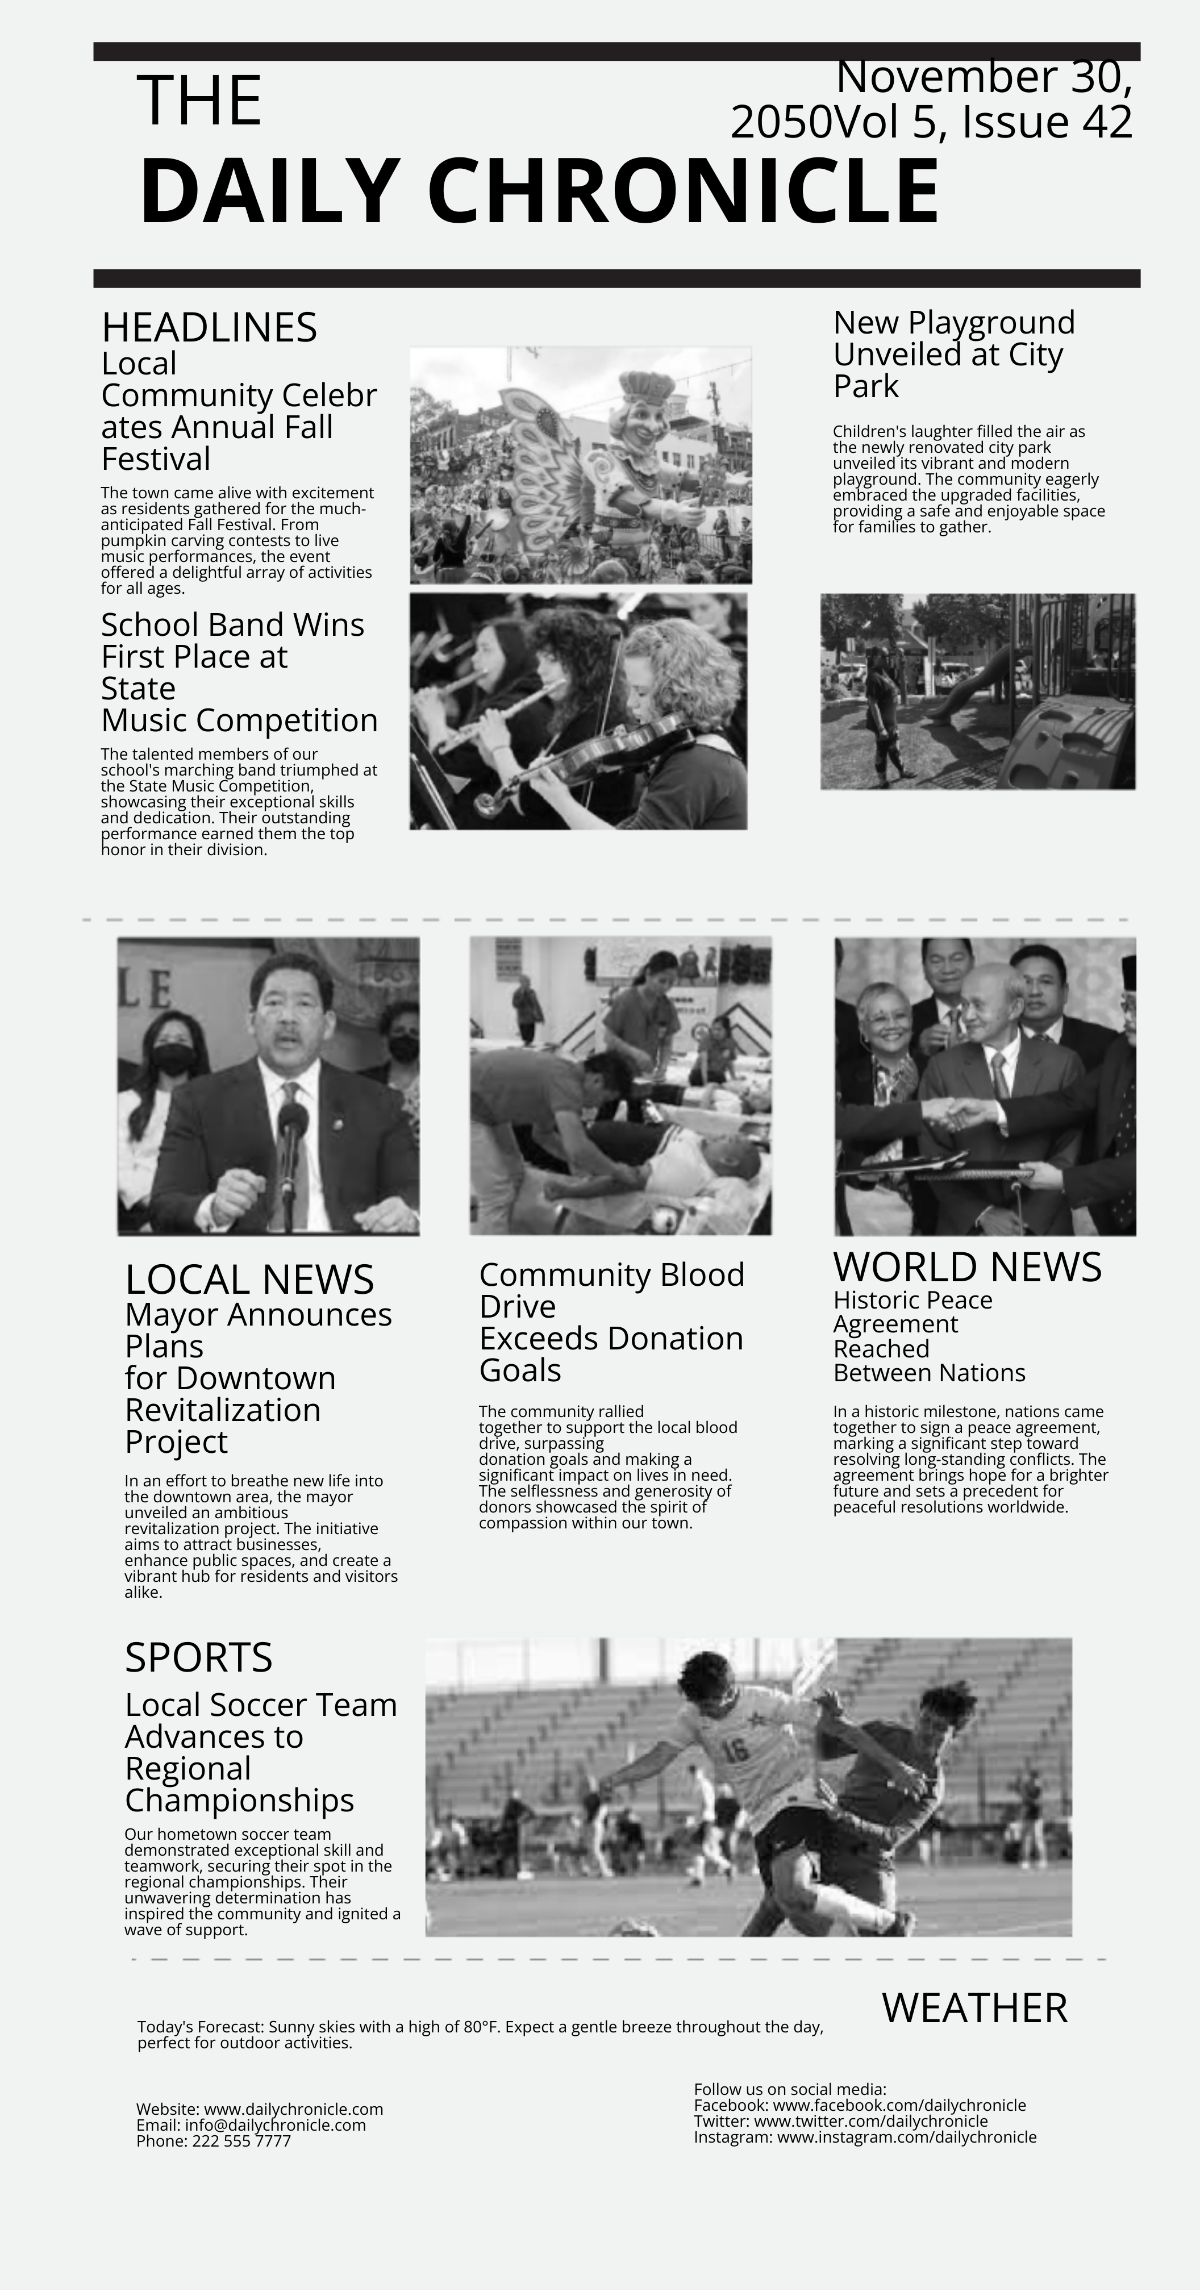 40 Best Newspaper & News Article Templates (Free)